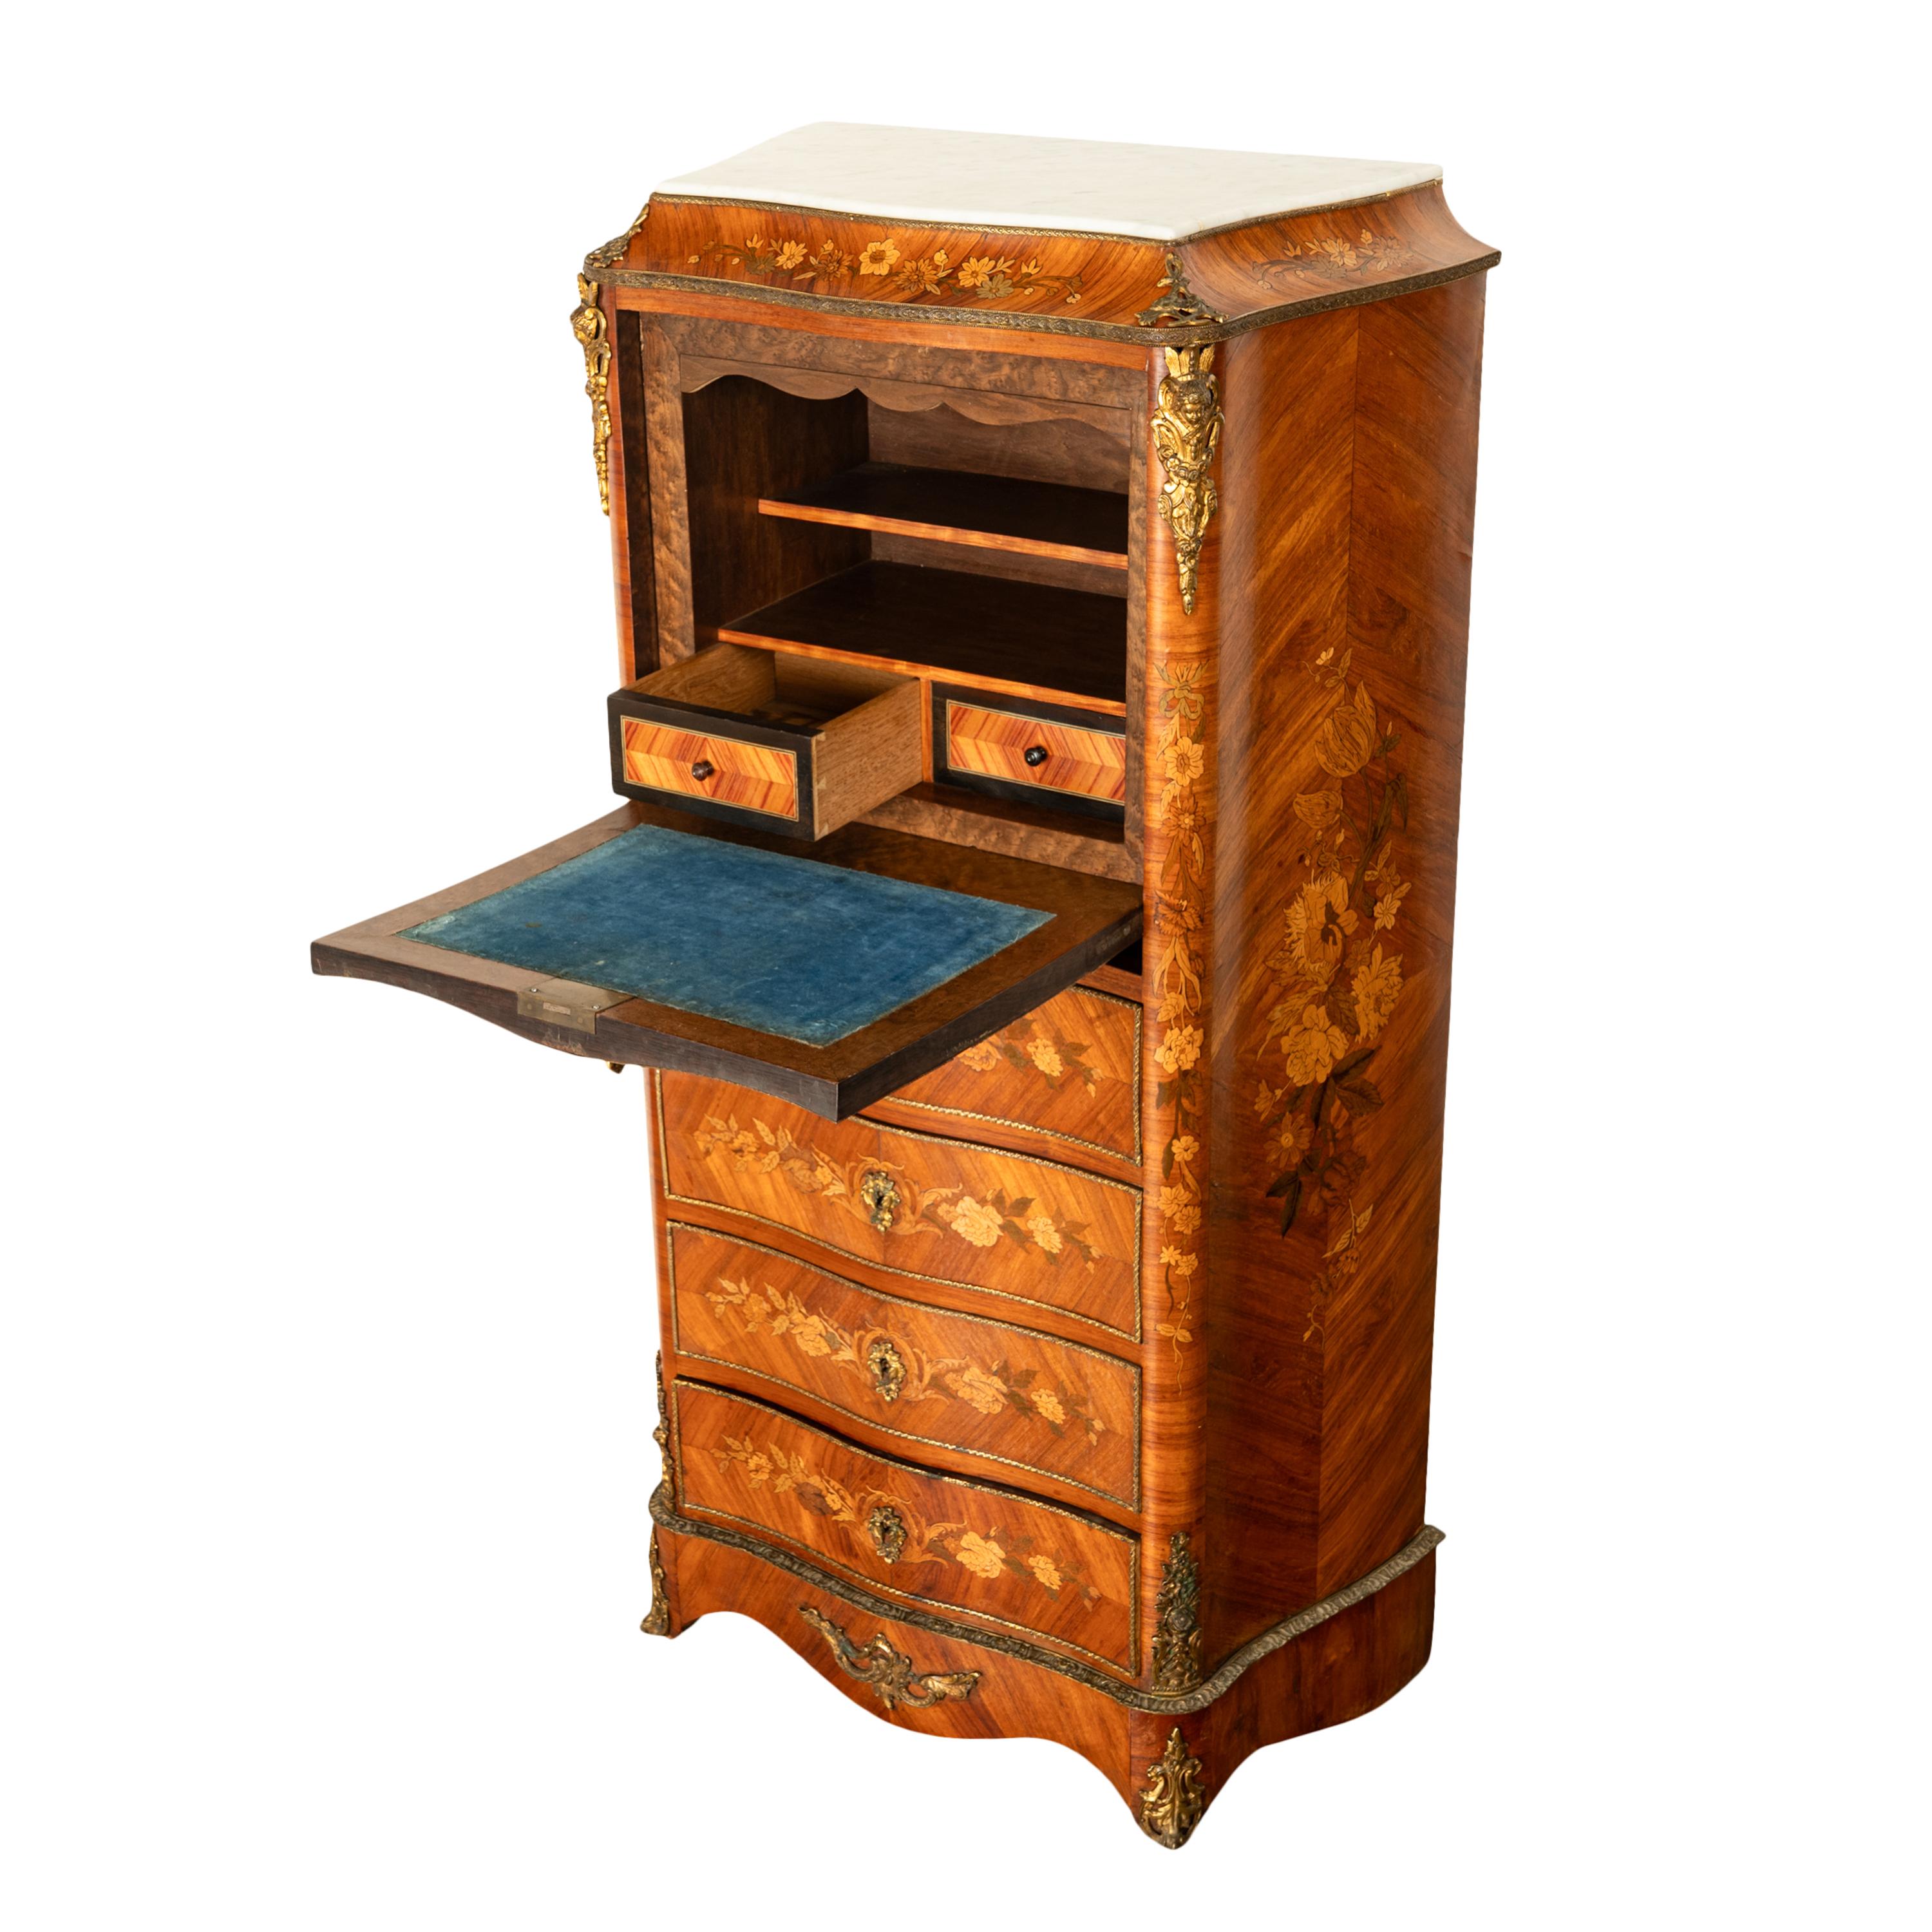 Fine Antique French Louis XV Marquetry Rosewood Ormolu Secretaire Abattant 1880 For Sale 1